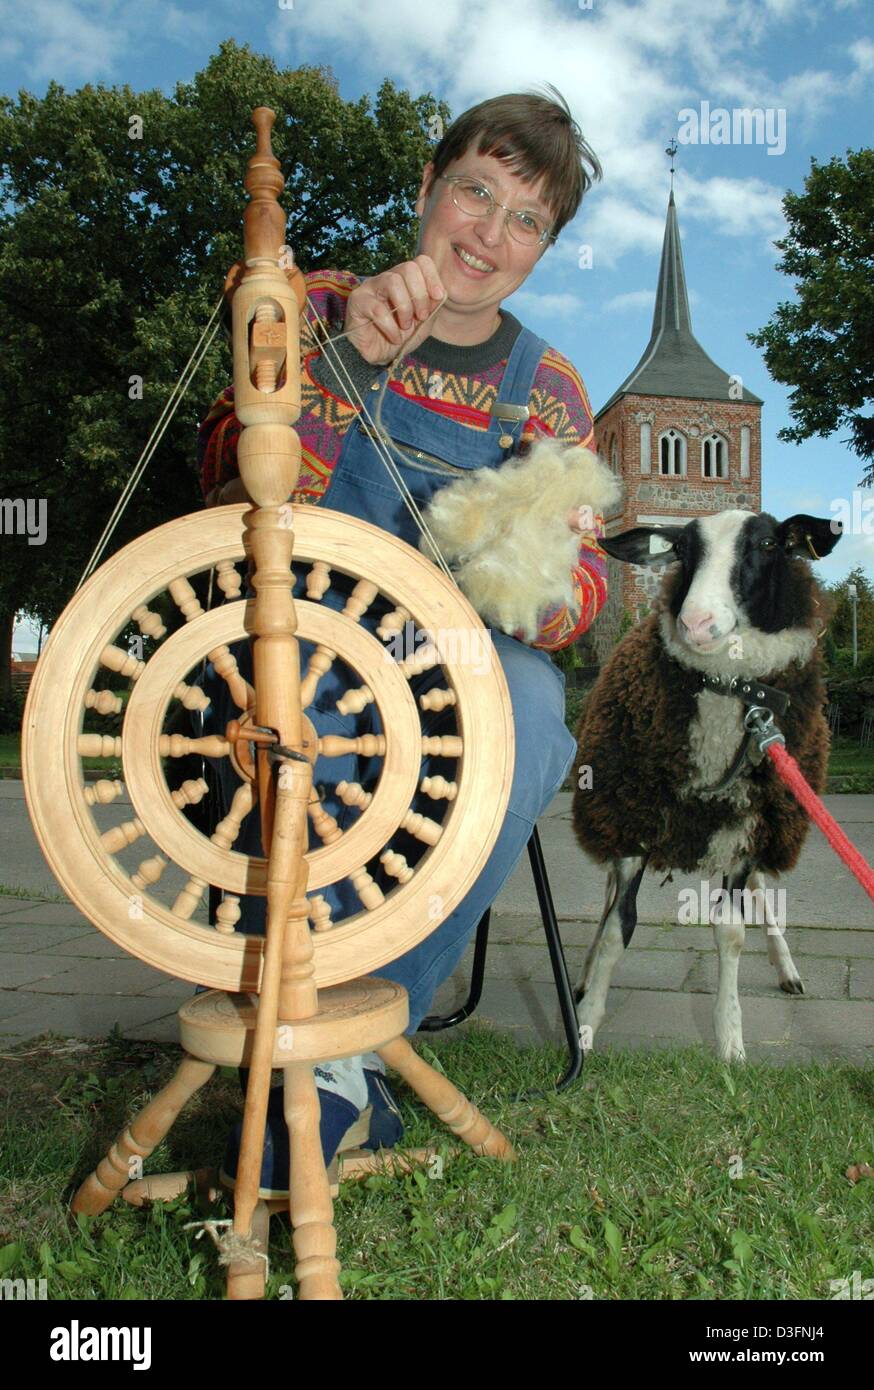 (dpa) - Ira Eggert works on a spinning wheel with a sheep standing by her side, in Meesiger, eastern Germany, 1 September 2004. Eggert had to give up her profession as a cattle breeder due to health reasons and now produces socks and pullovers for her friends, family and neighbours. It takes her around ten hours spinning and knitting to finish a pair of socks. Stock Photo